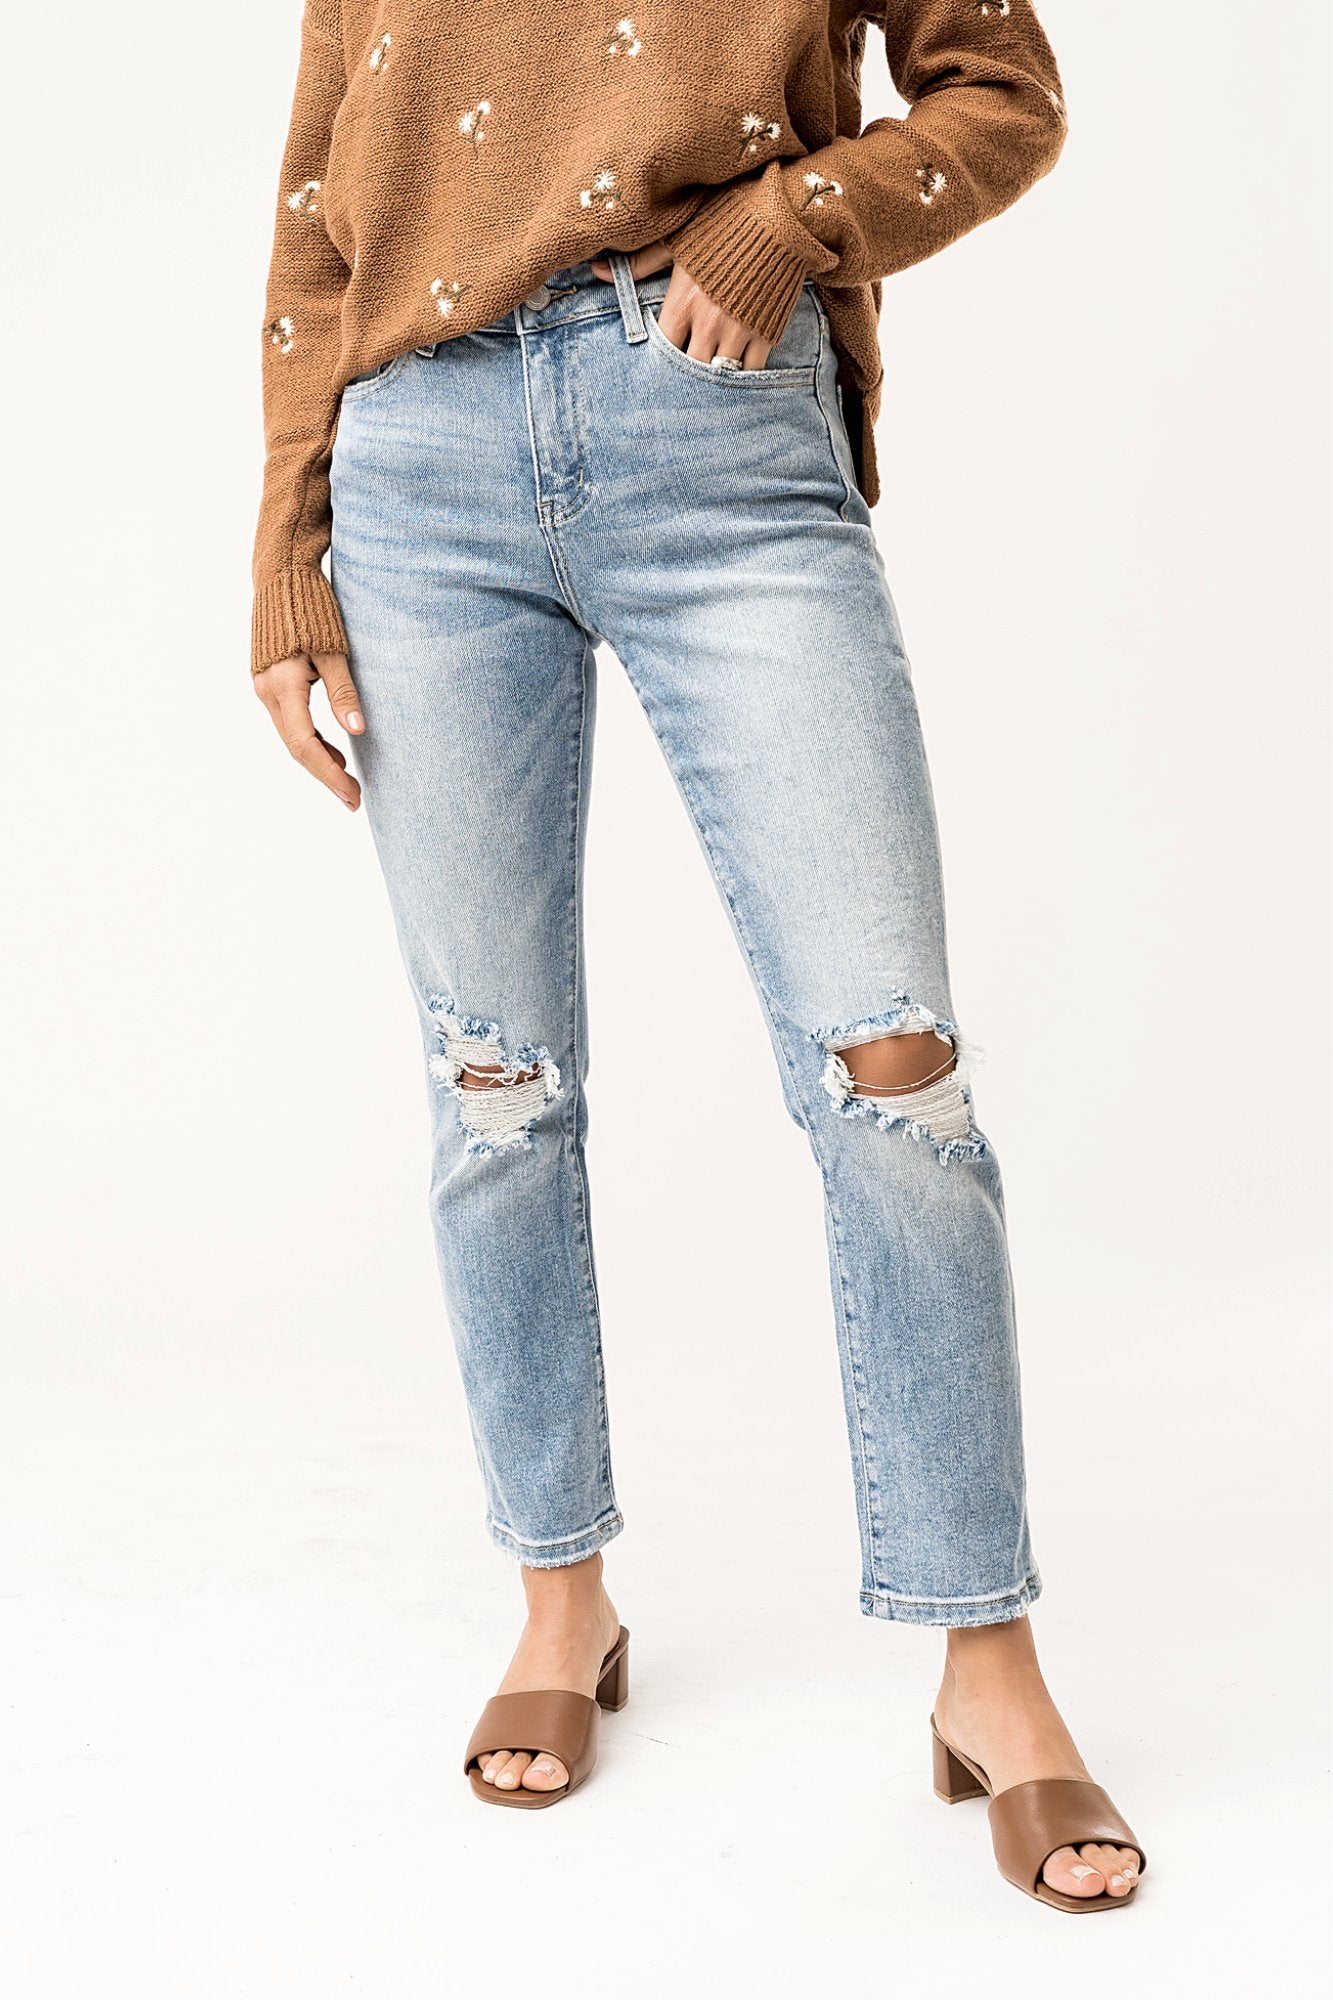 Sloane Jeans Clothing Holley Girl 